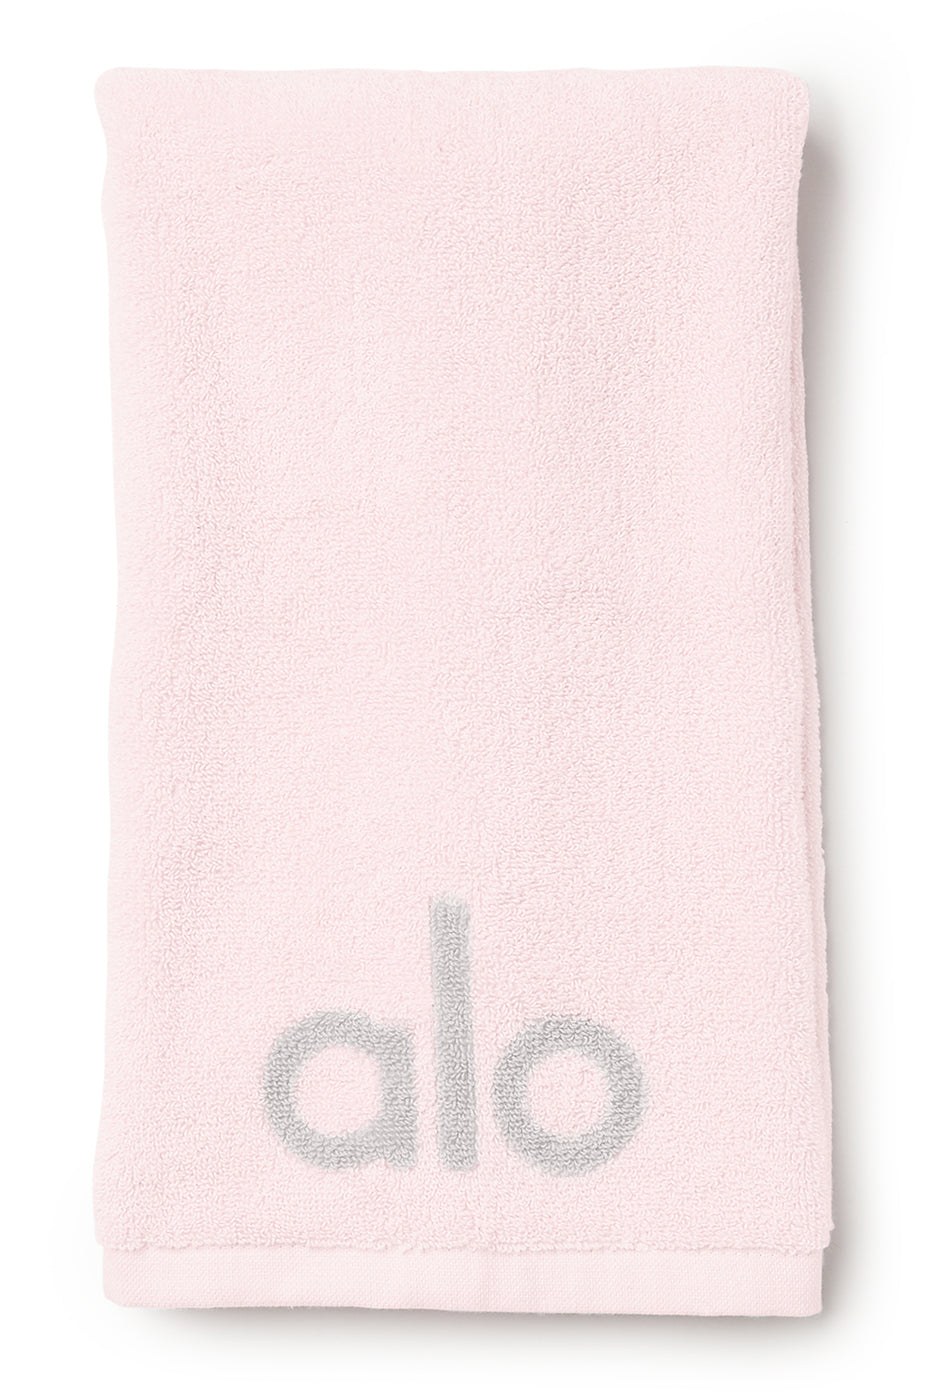 No Sweat Hand Towel in Powder Pink/Dove Grey by Alo Yoga